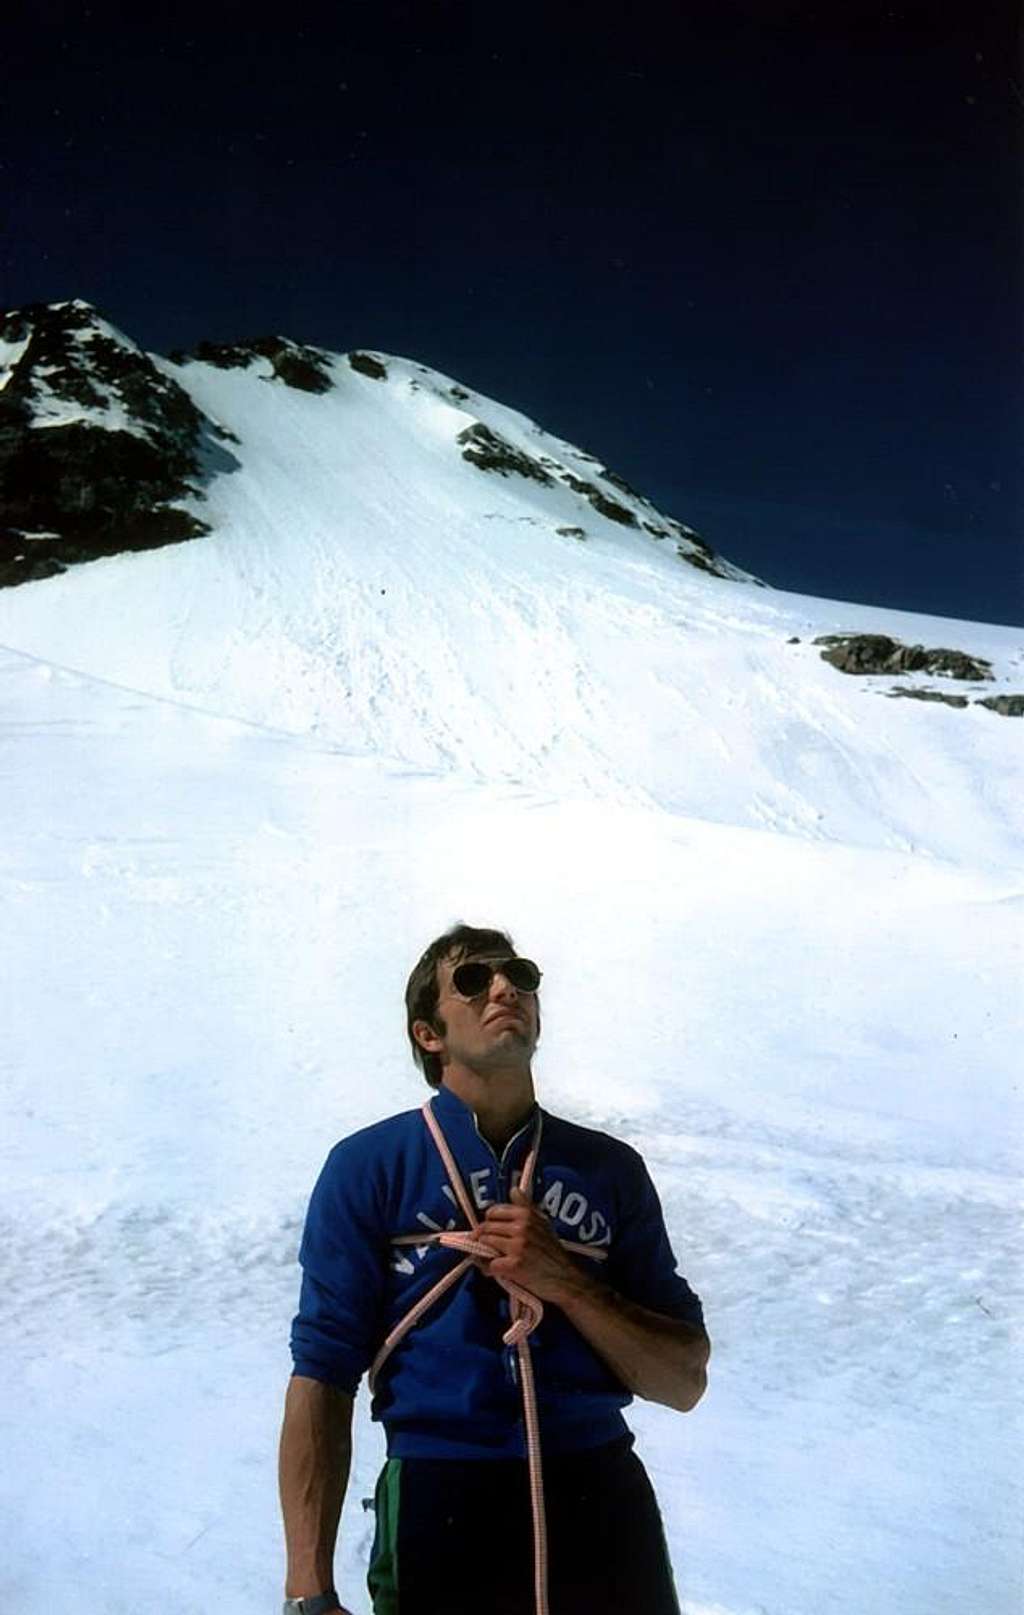 <b><font color =blue>LUSENEY's Becca NORTH Face</font> (3504m) <B><FONT COLOR=RED>AUGUST HOLIDAY </FONT>(15th, 1977)